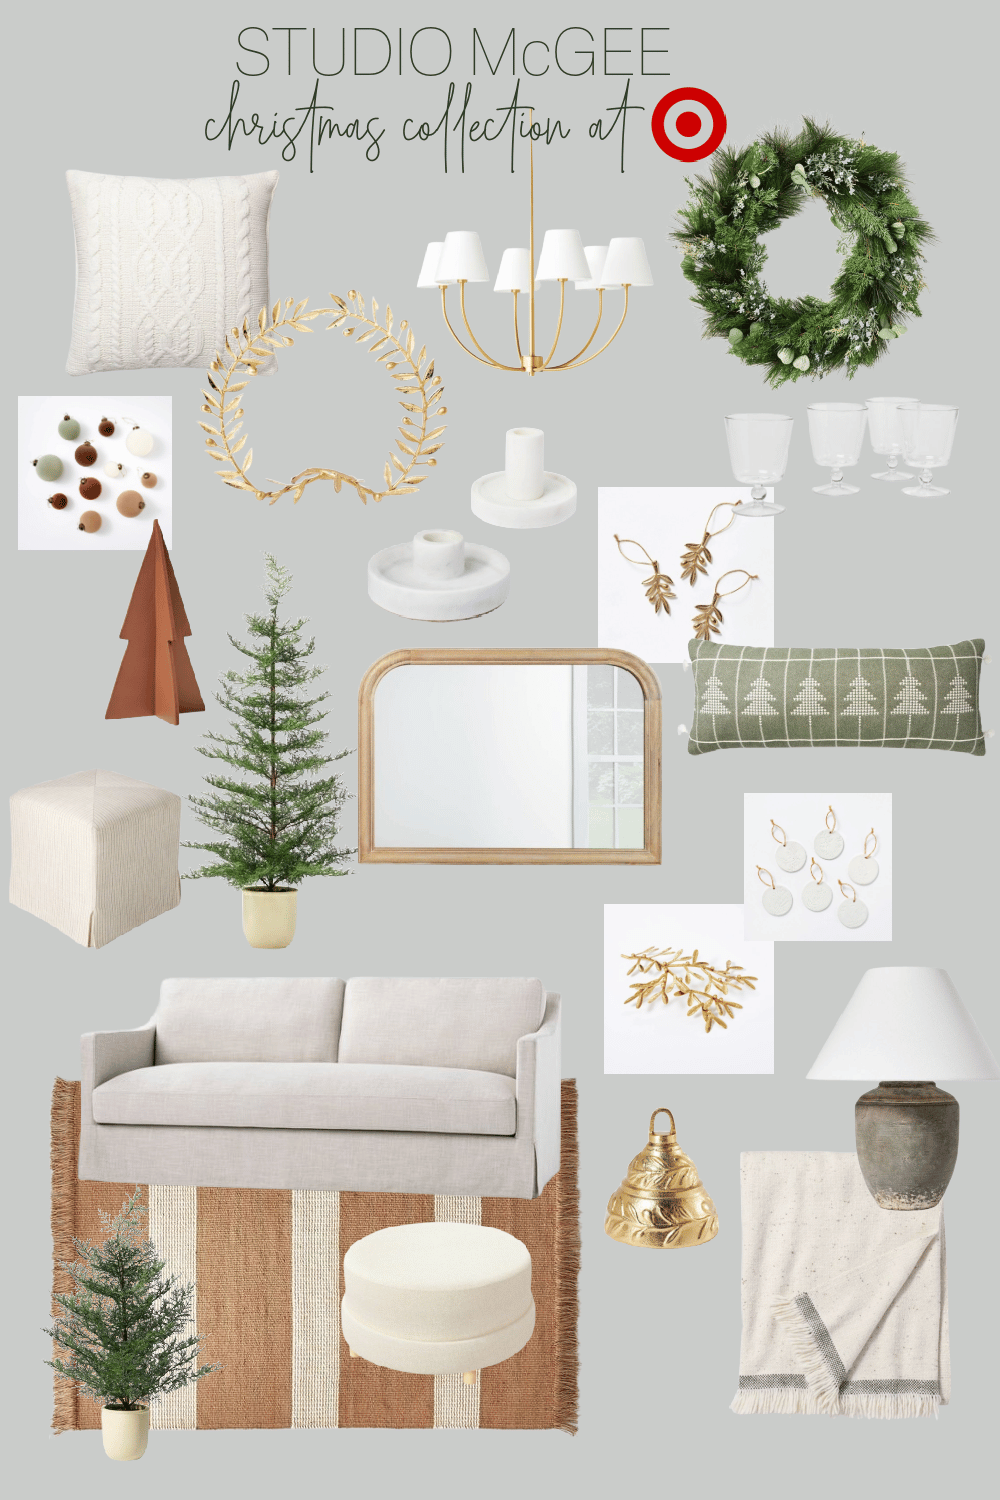 Studio McGee Christmas Collection at Target is Live.